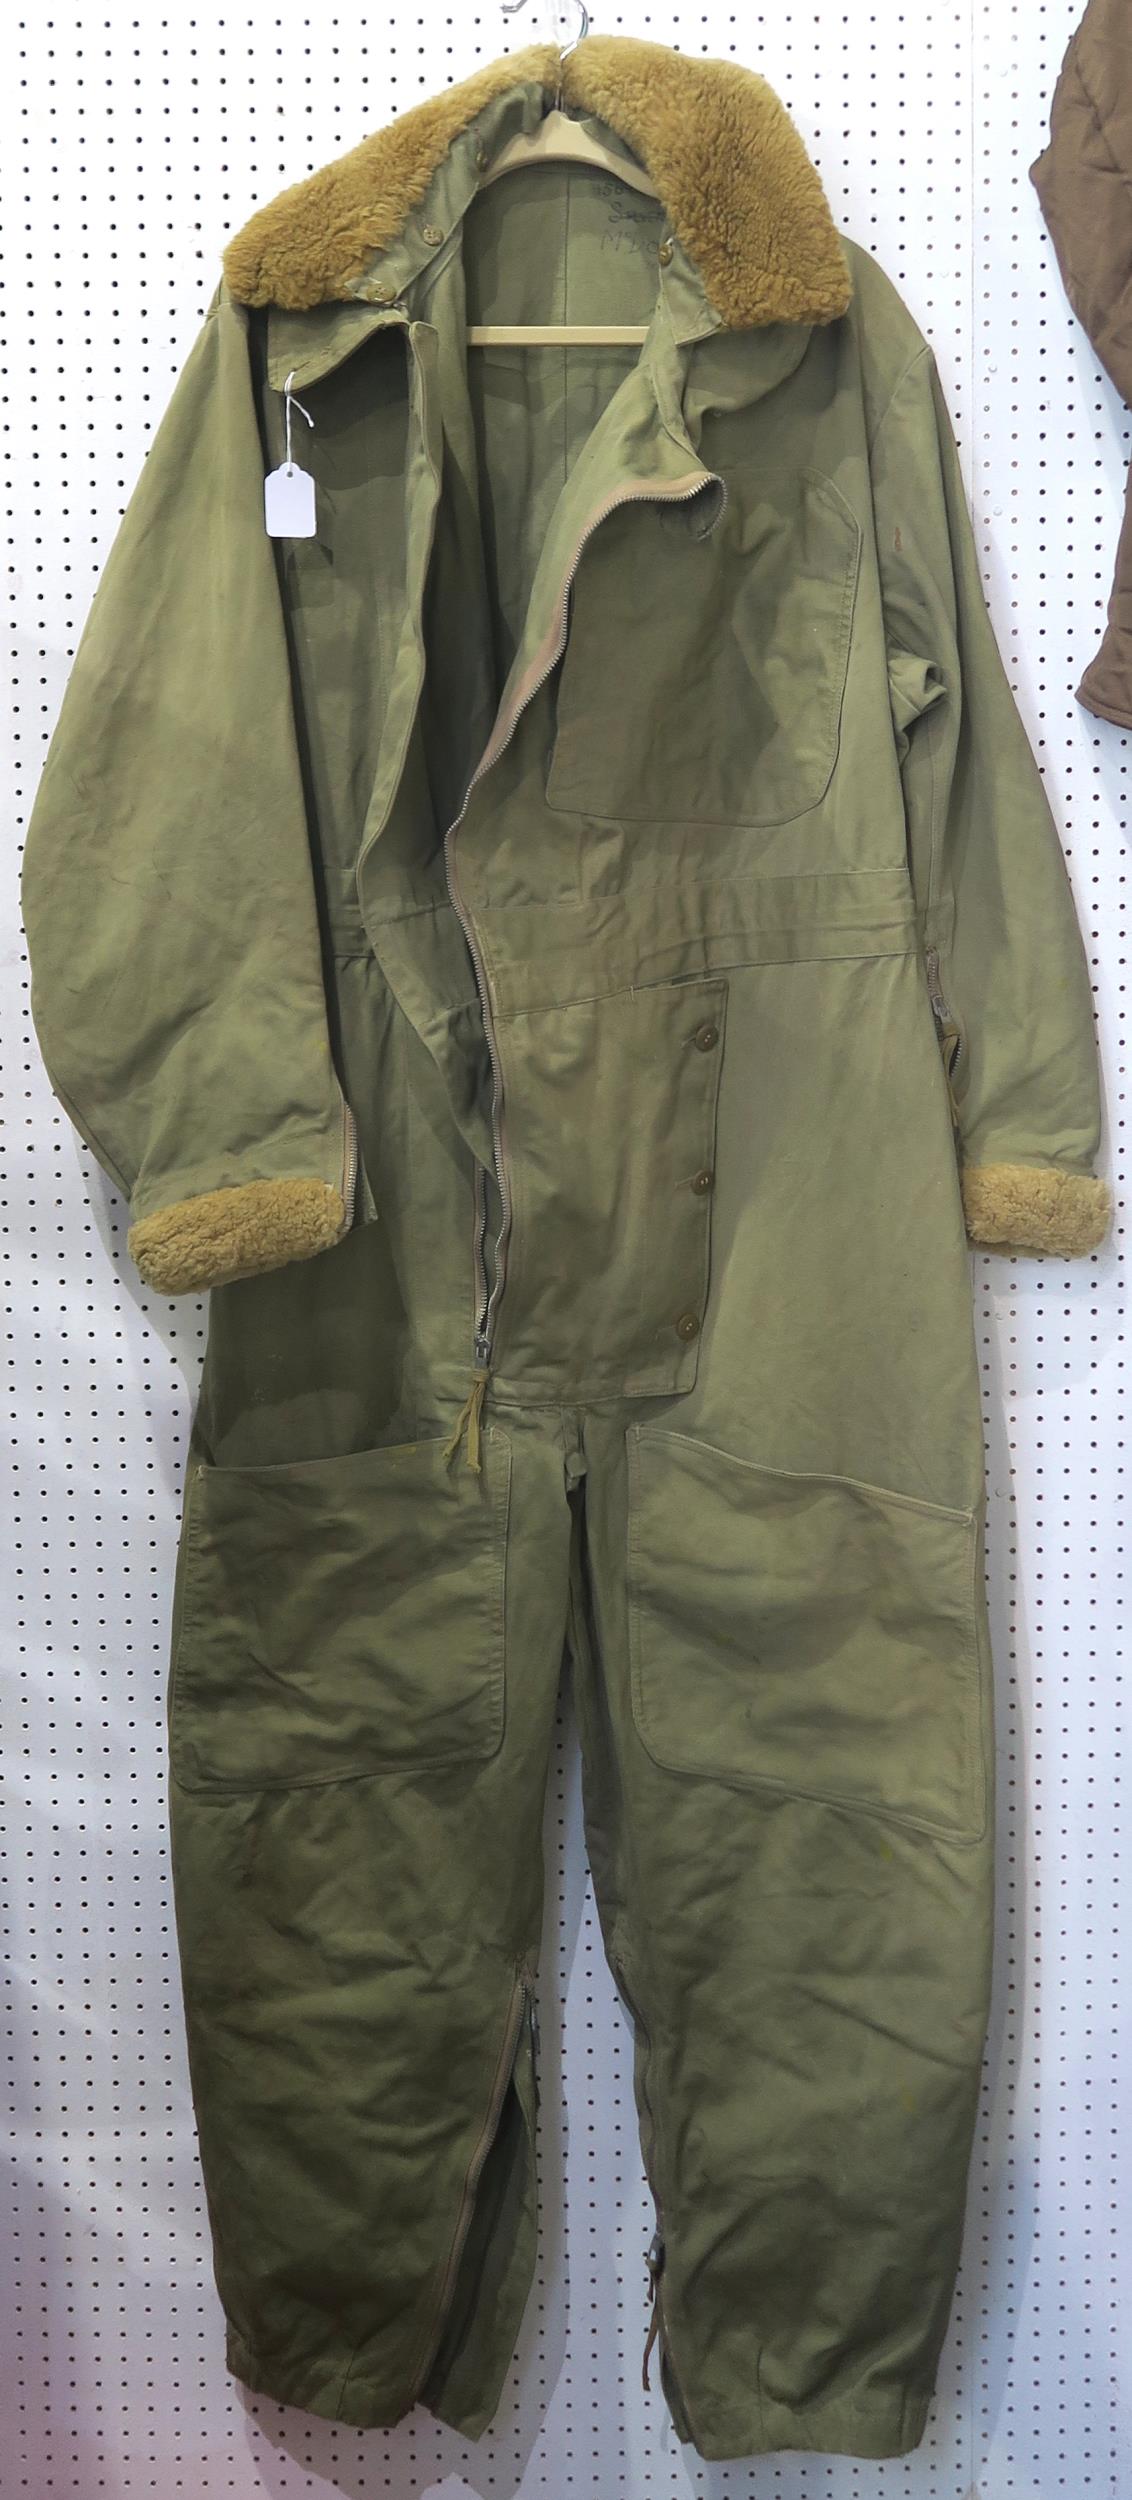 A WW2 RAF 1940 pattern Sidcot flying suit, size no. 6, with fleece-trimmed cuffs and detachable - Image 2 of 3